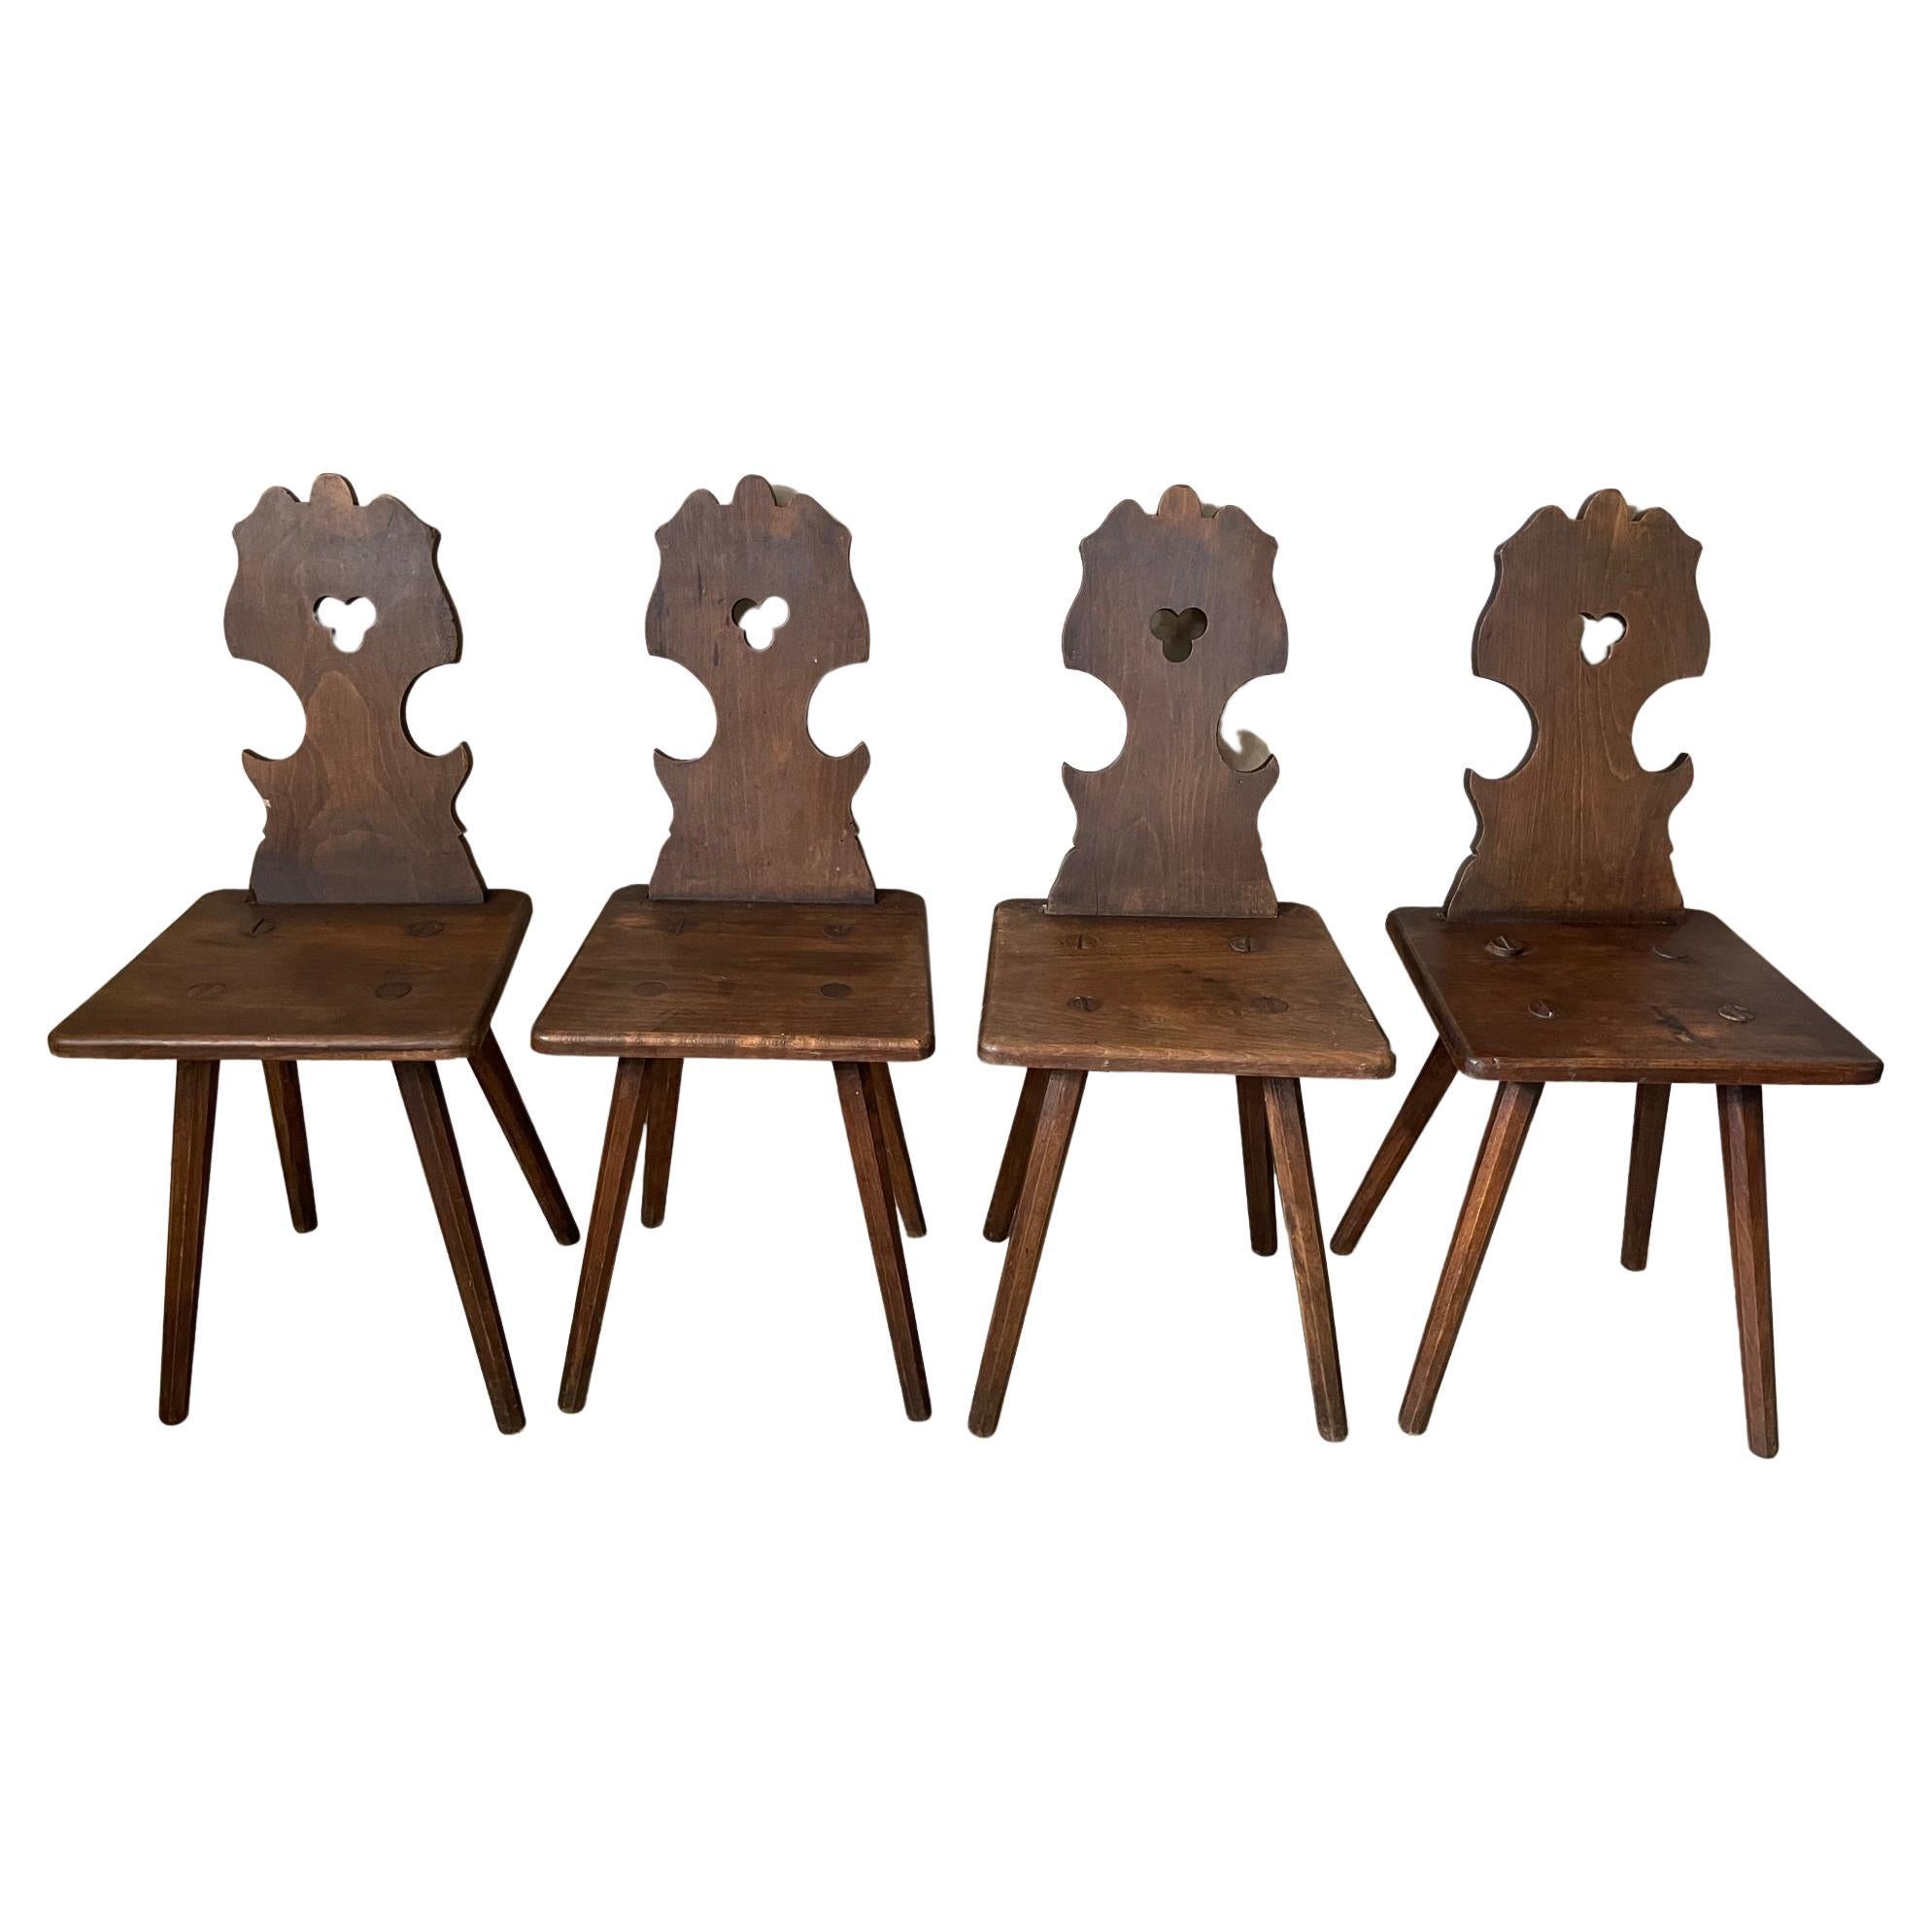 19th Century French Alsace Regional Set of Four Walnut Chairs, 1870s